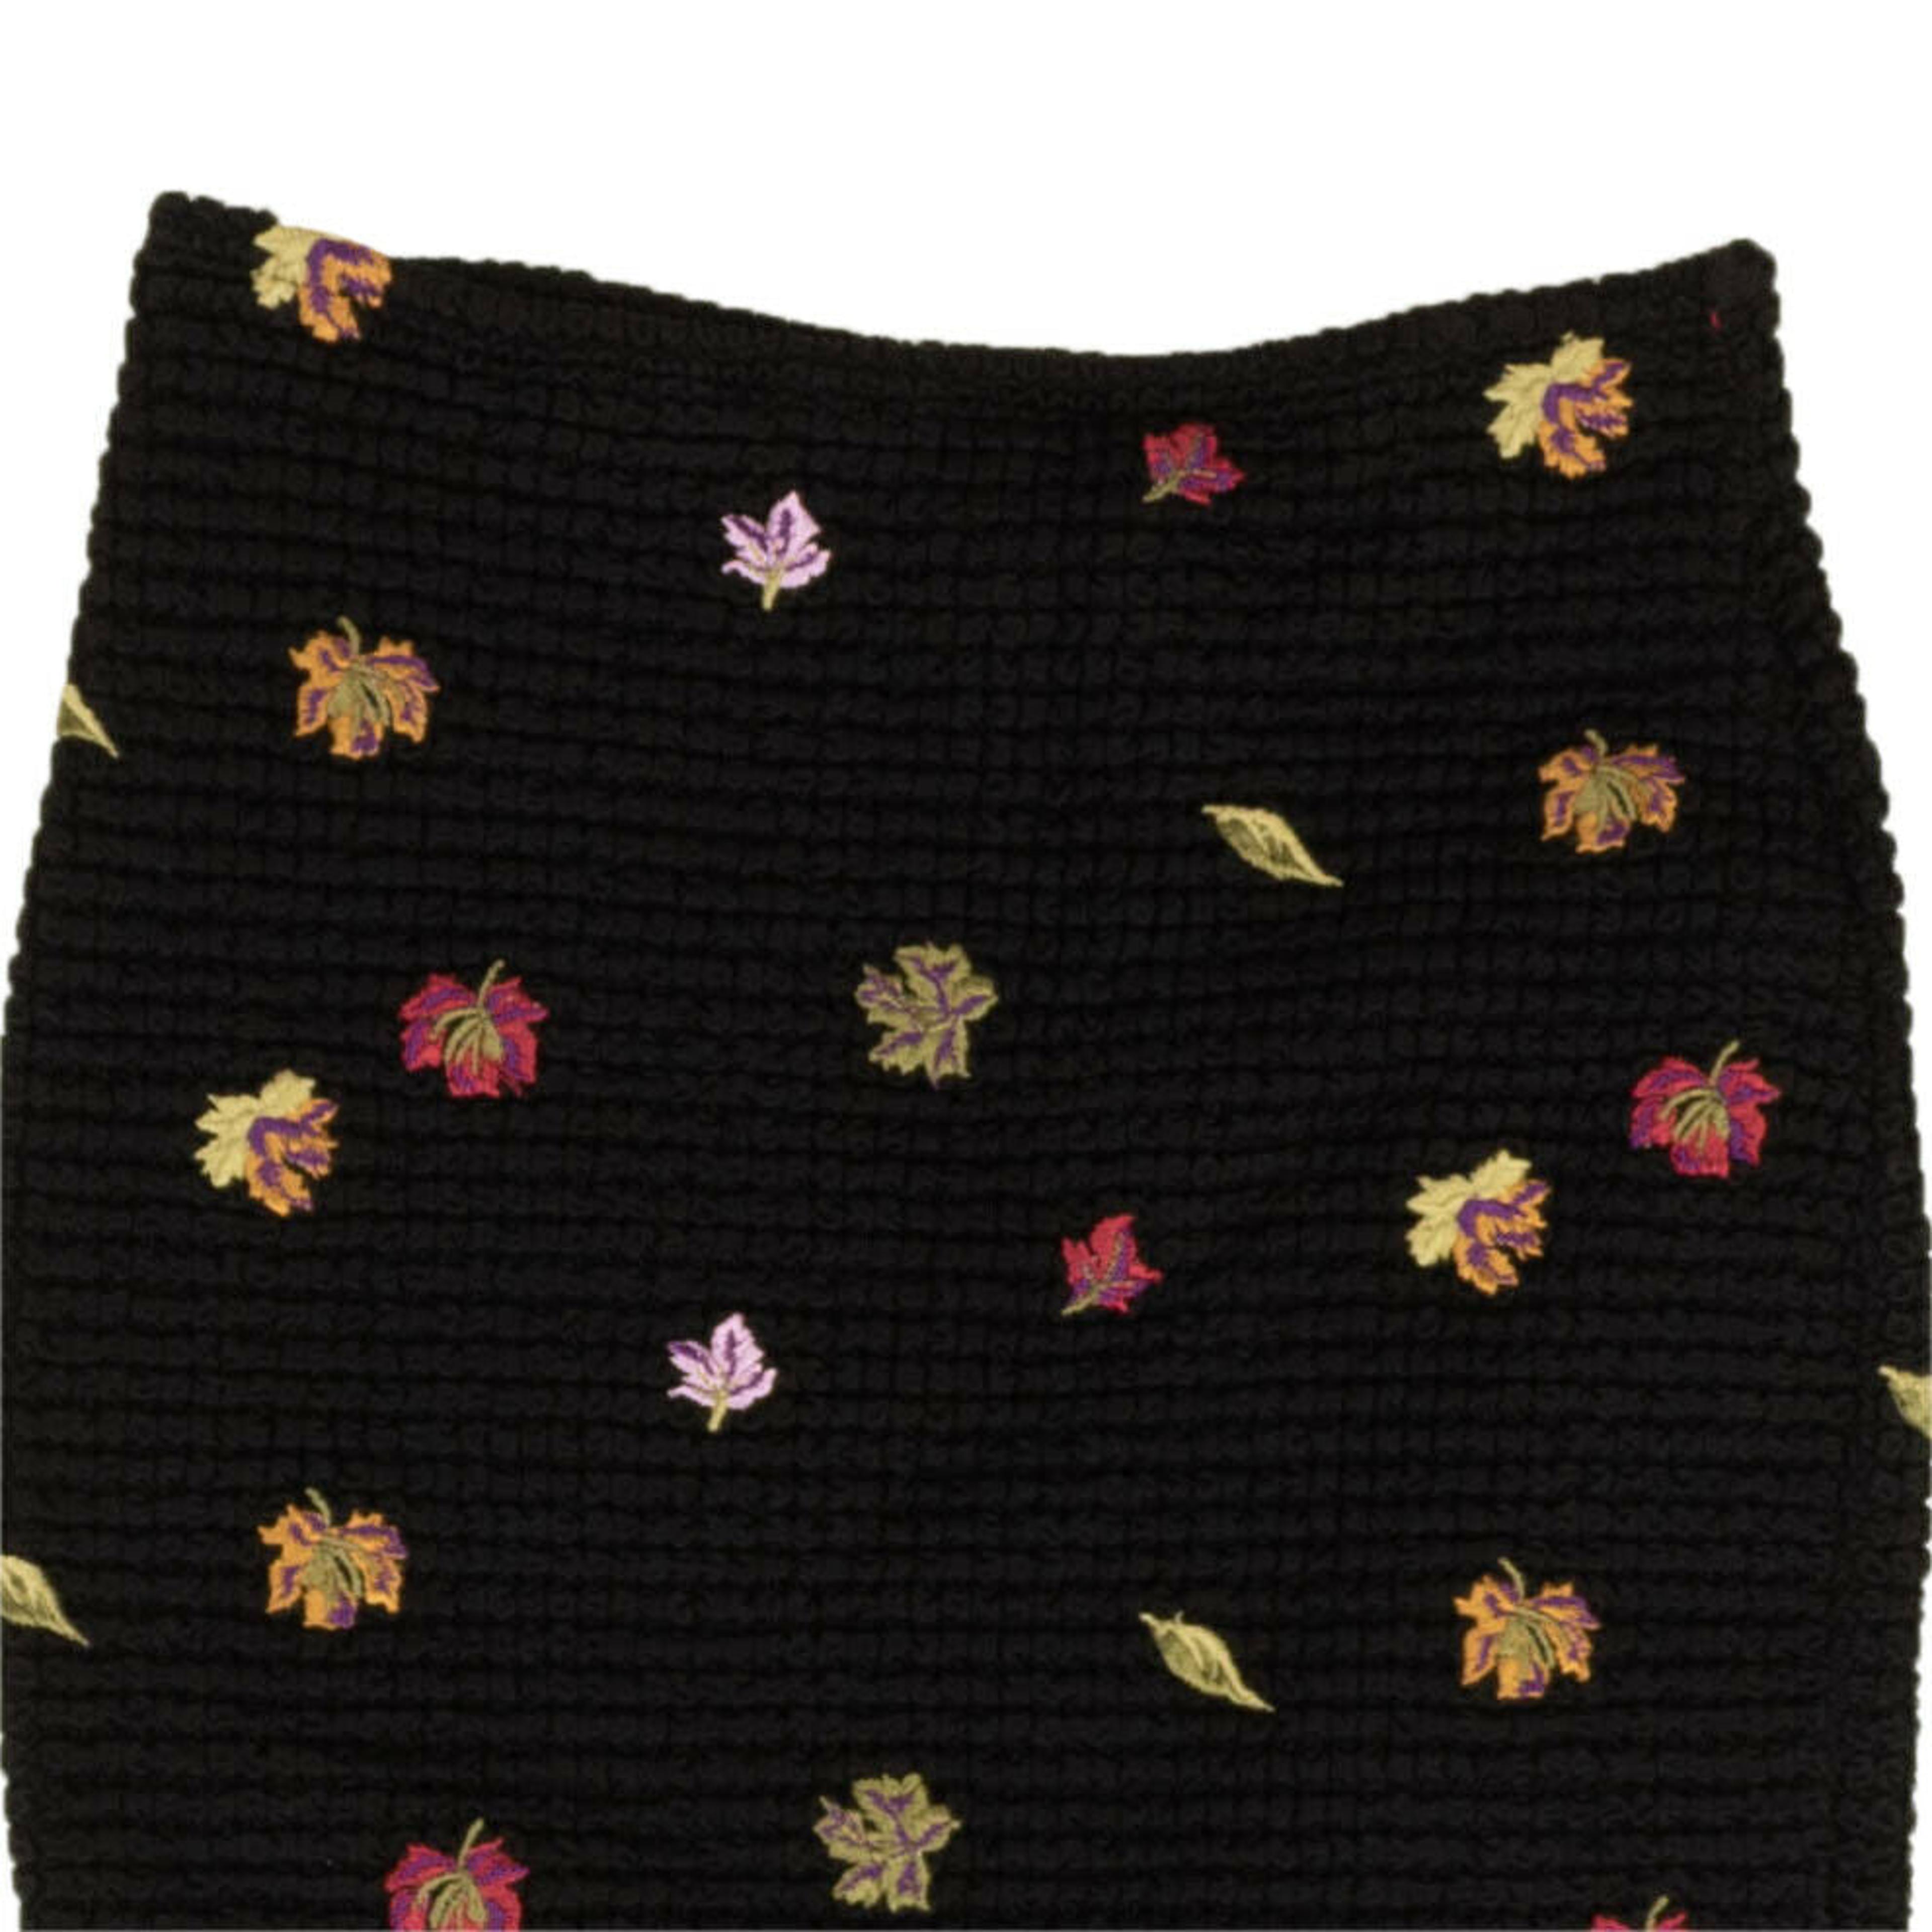 Alternate View 2 of Black Embroidered Leaves Skirt